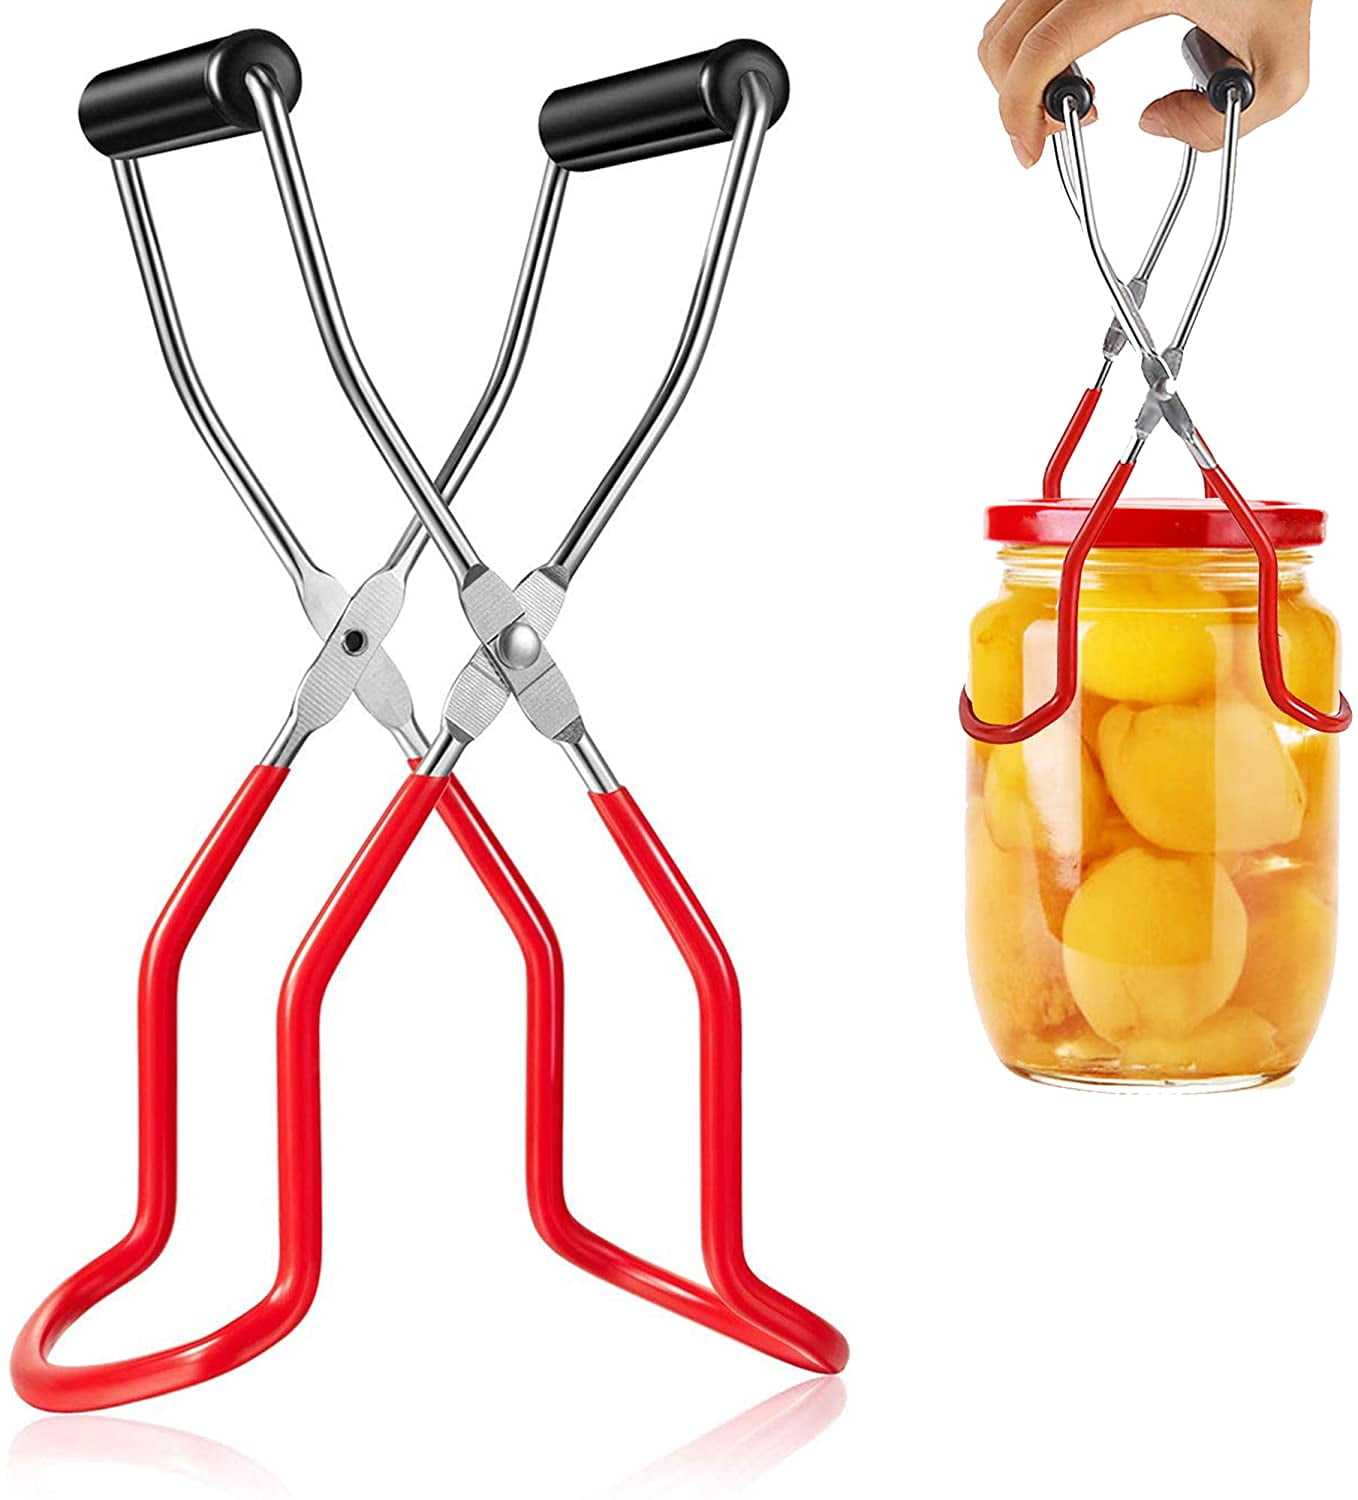 Stainless Steel Jar Lifter Tongs with Rubber Grips Anti-Slip Canning Tongs for Kitchen Restaurant Horuhue Canning Jar Lifter